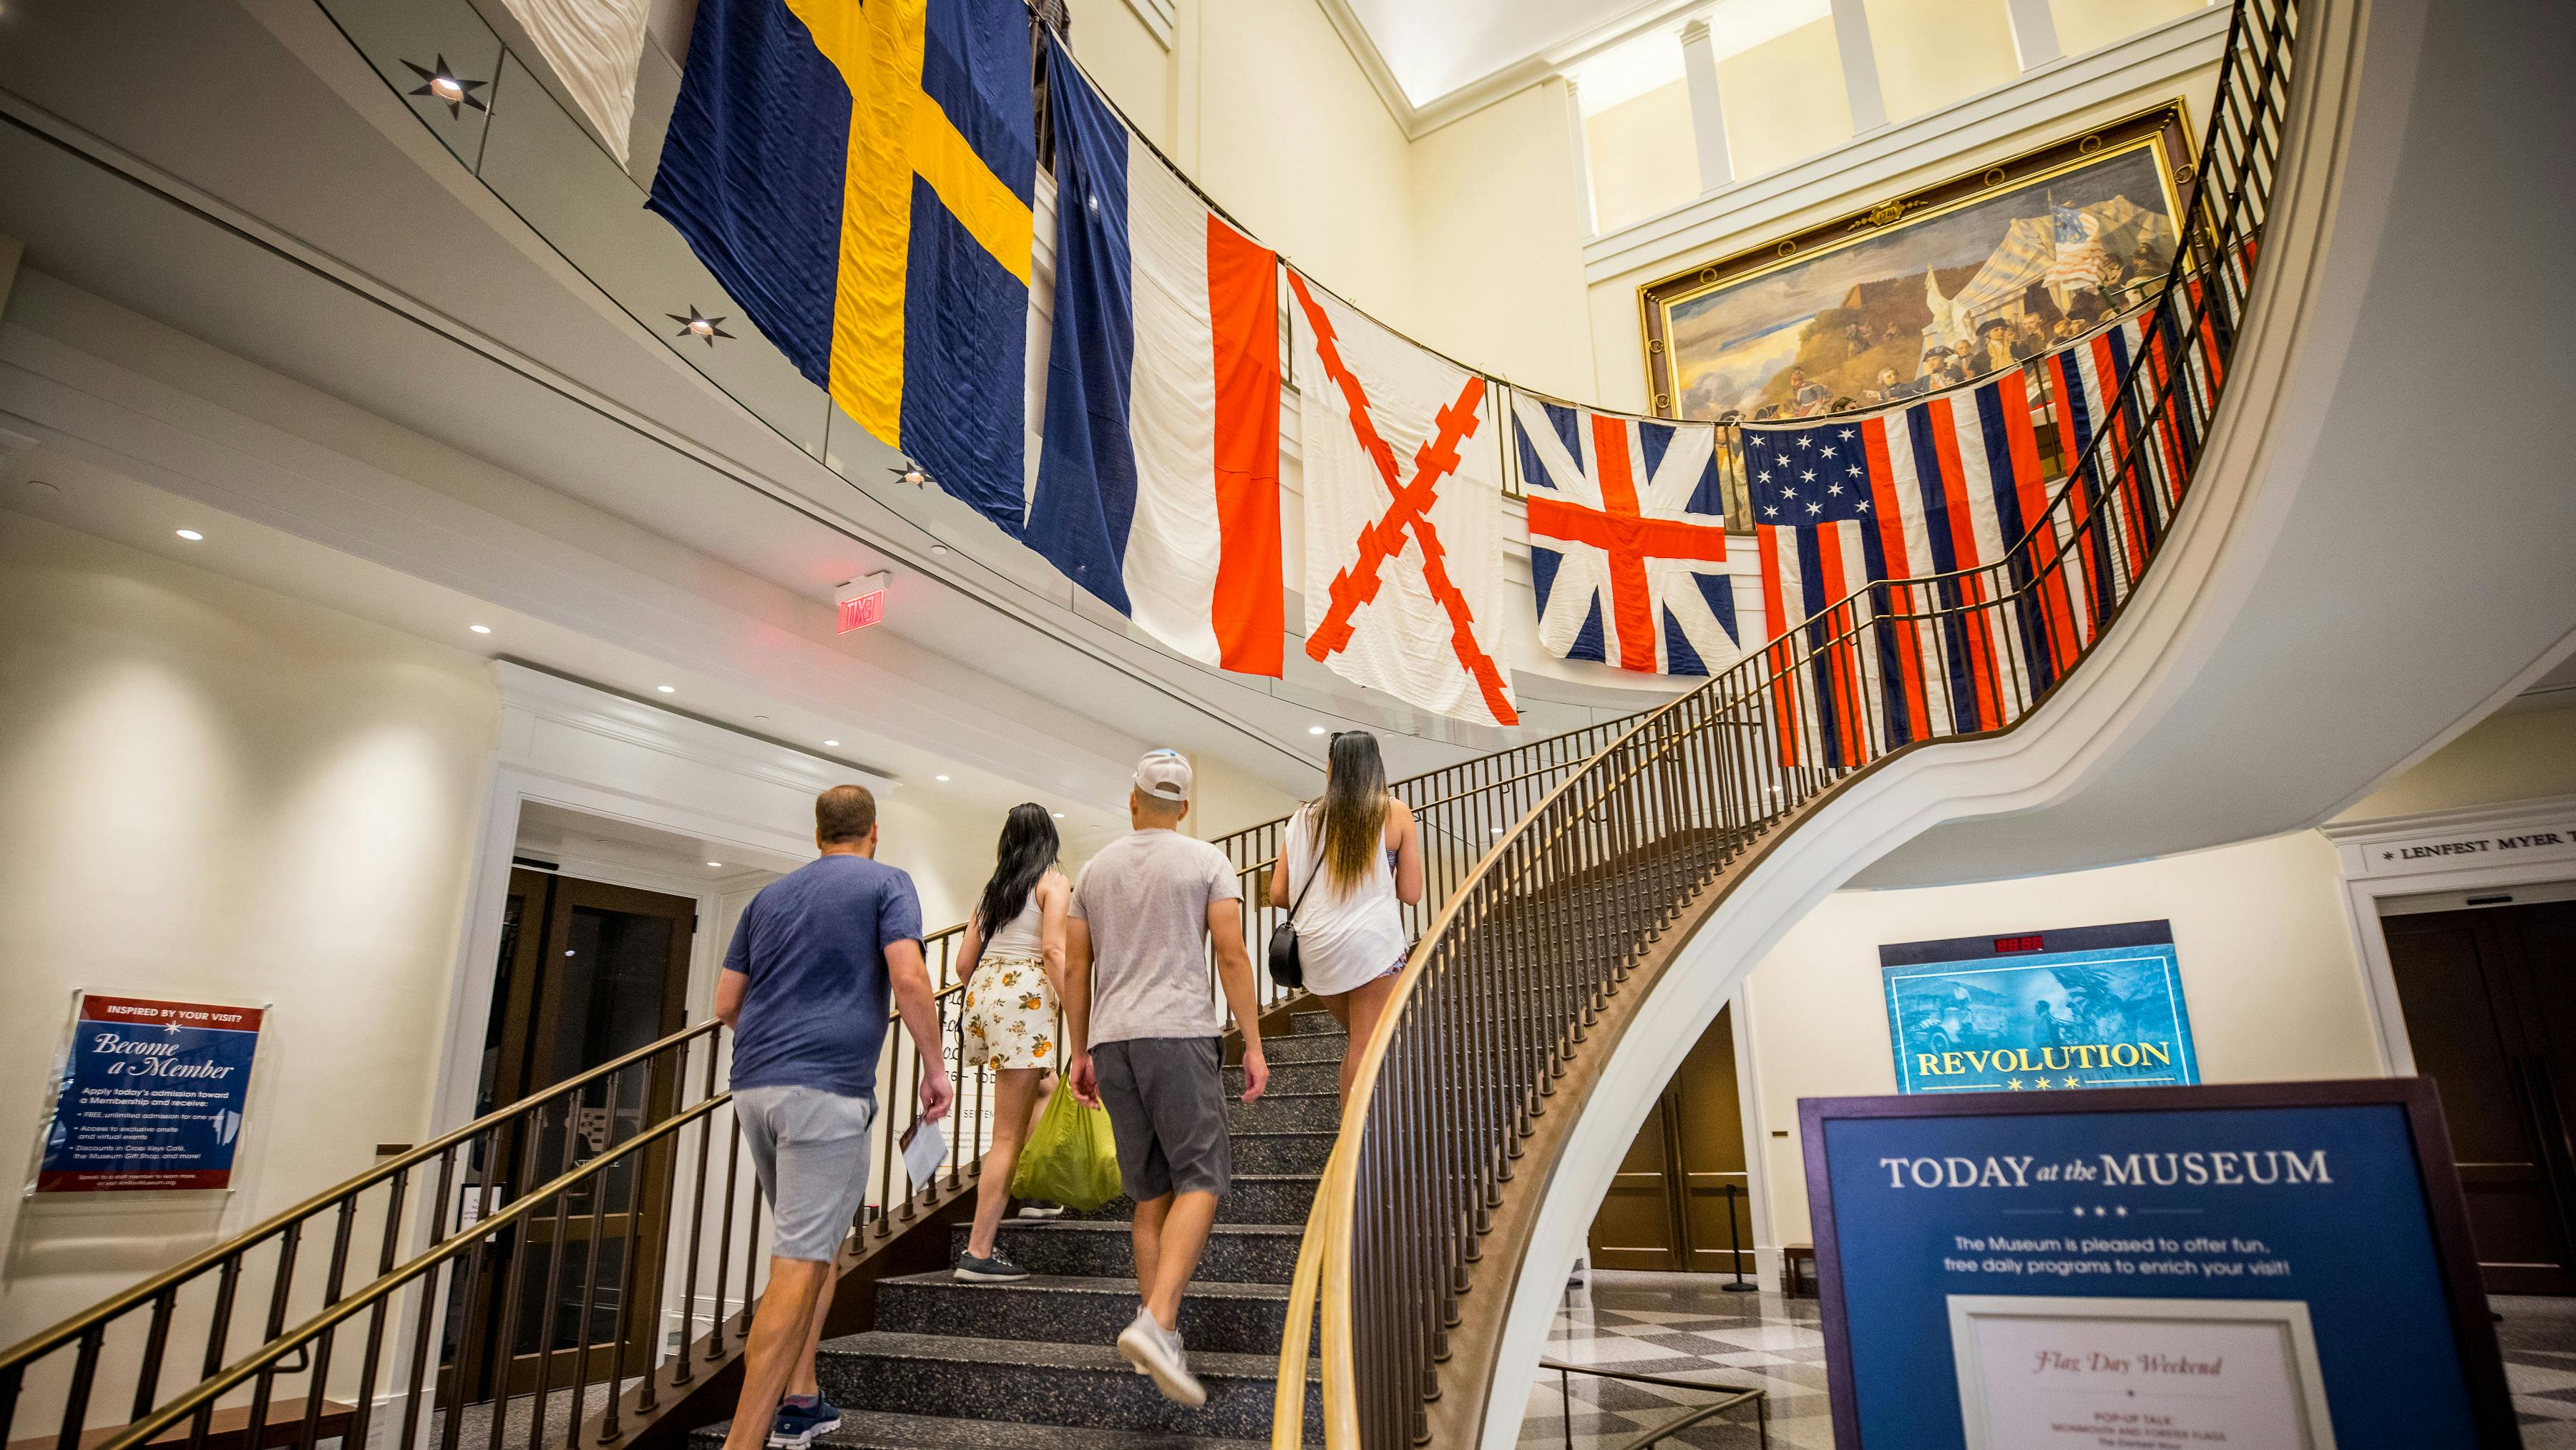 Flags and Founding Documents, 1776-Today - Museum of the American